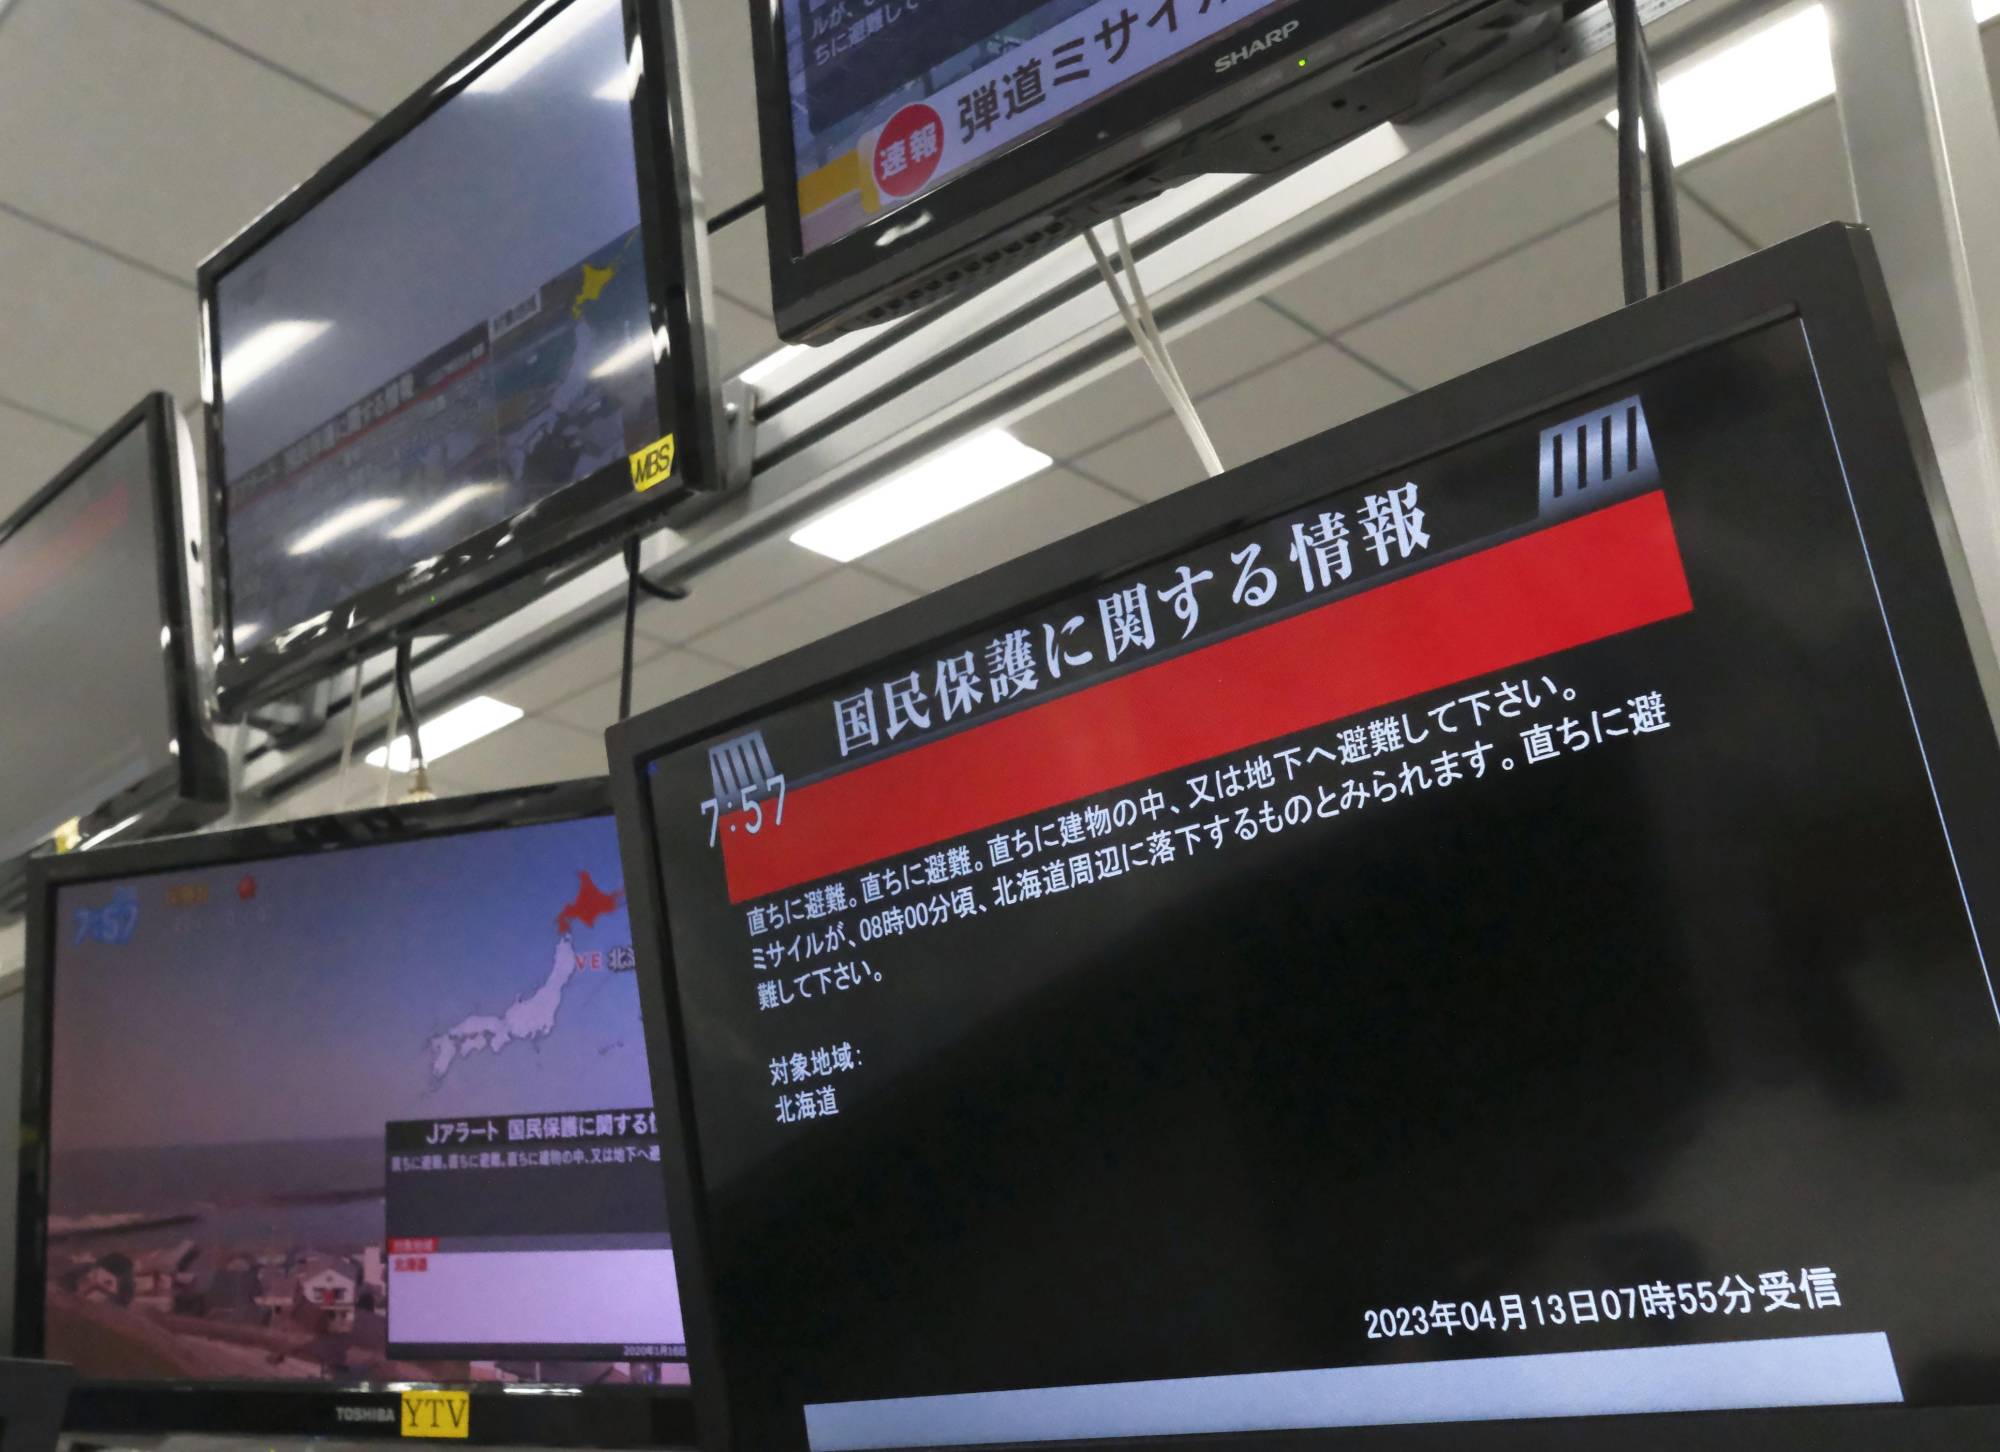 A warning from Japan's J-Alert system on Thursday morning following a North Korean missile launch  | KYODO